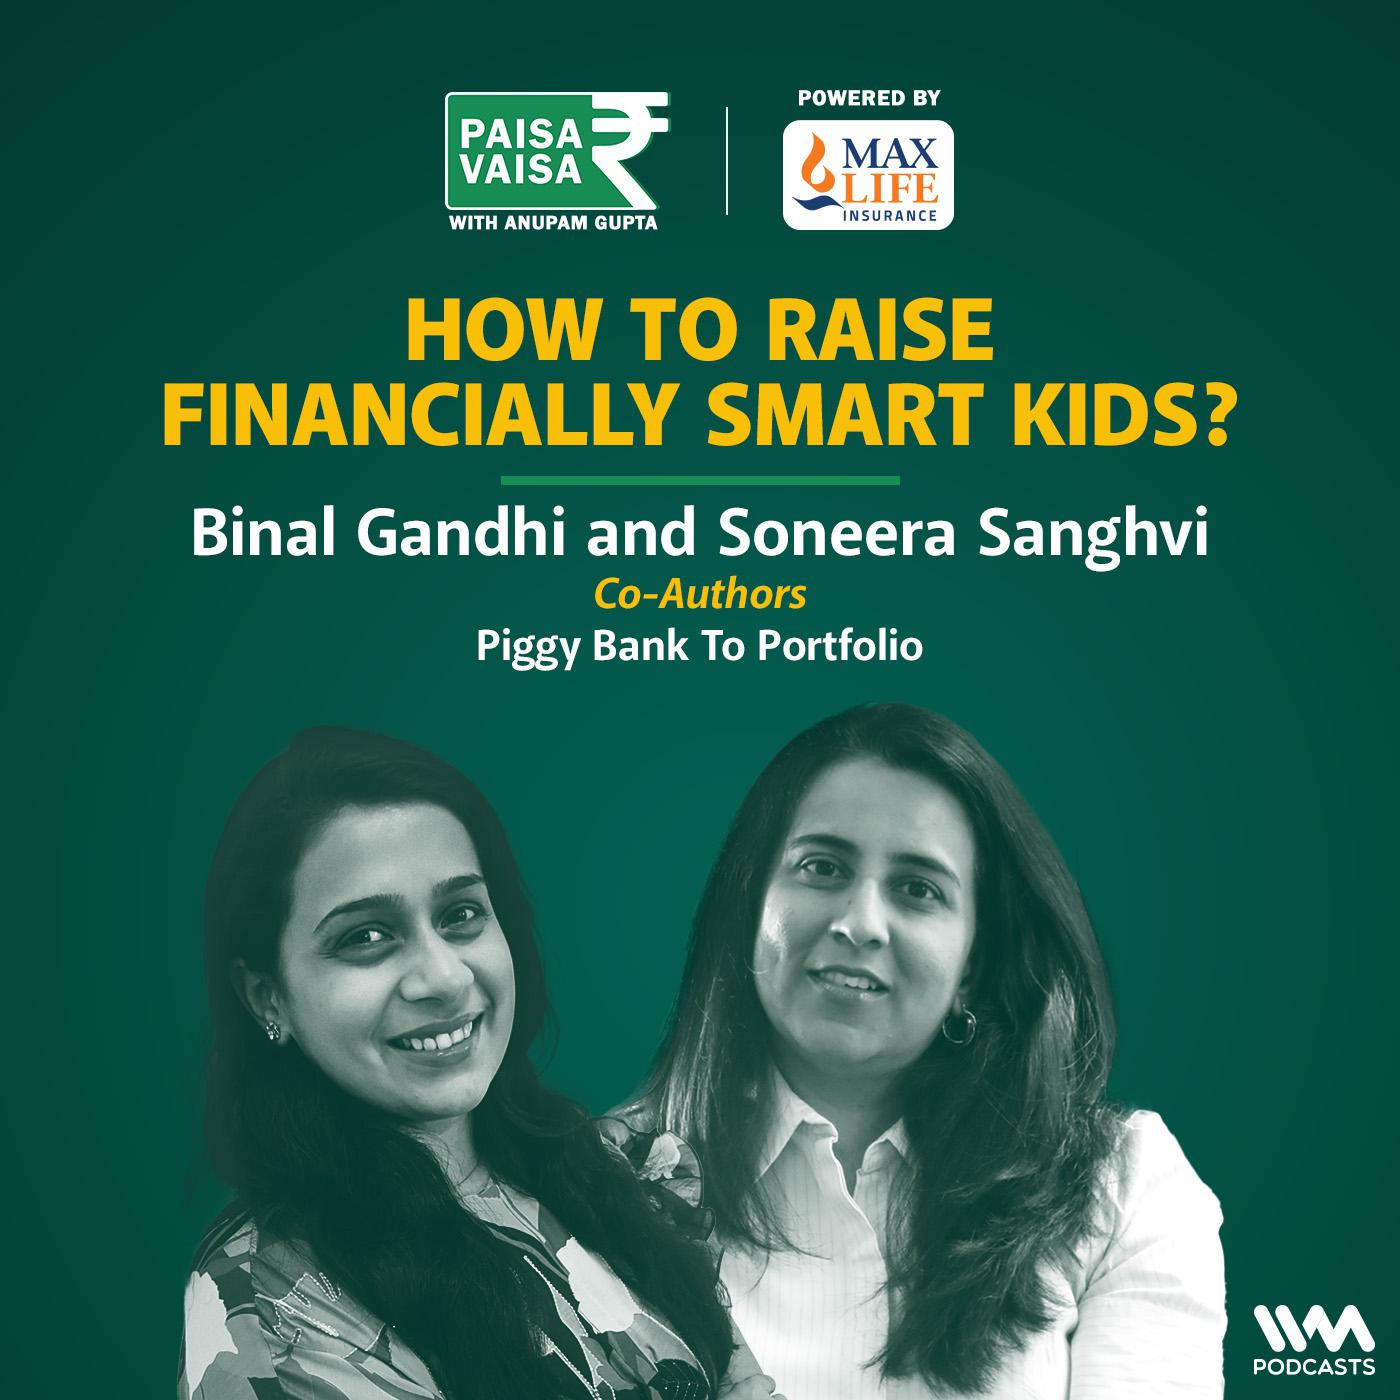 How to raise financially smart kids?